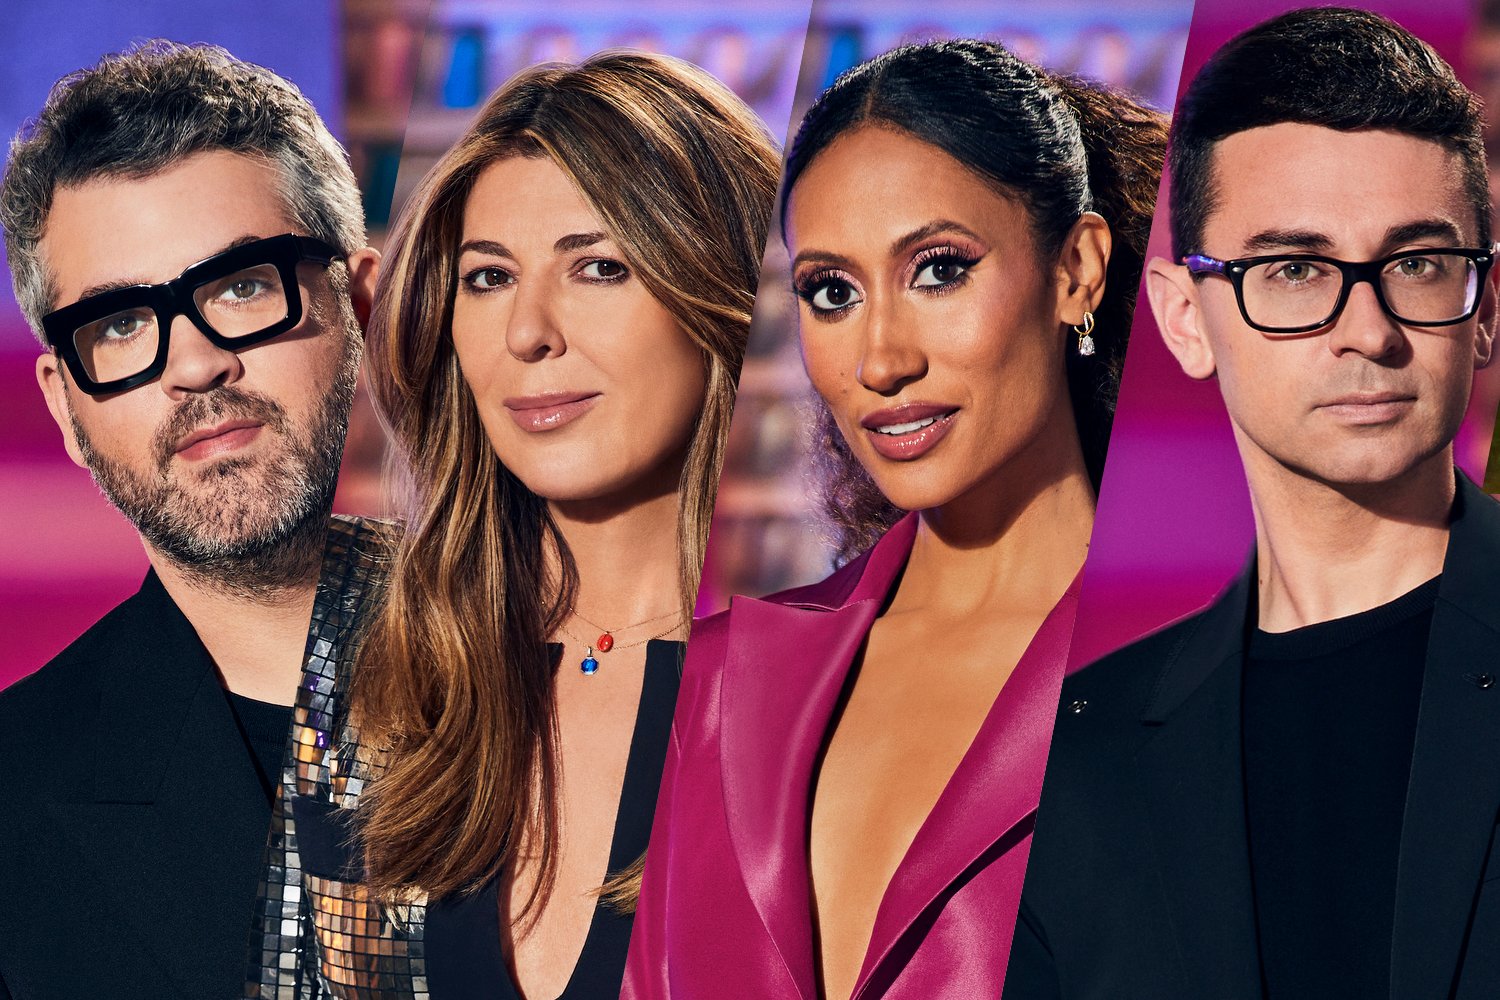 ‘Project Runway’ Season 19 Finally Gets Premiere Date and ‘The Real Housewives’ Guest Stars